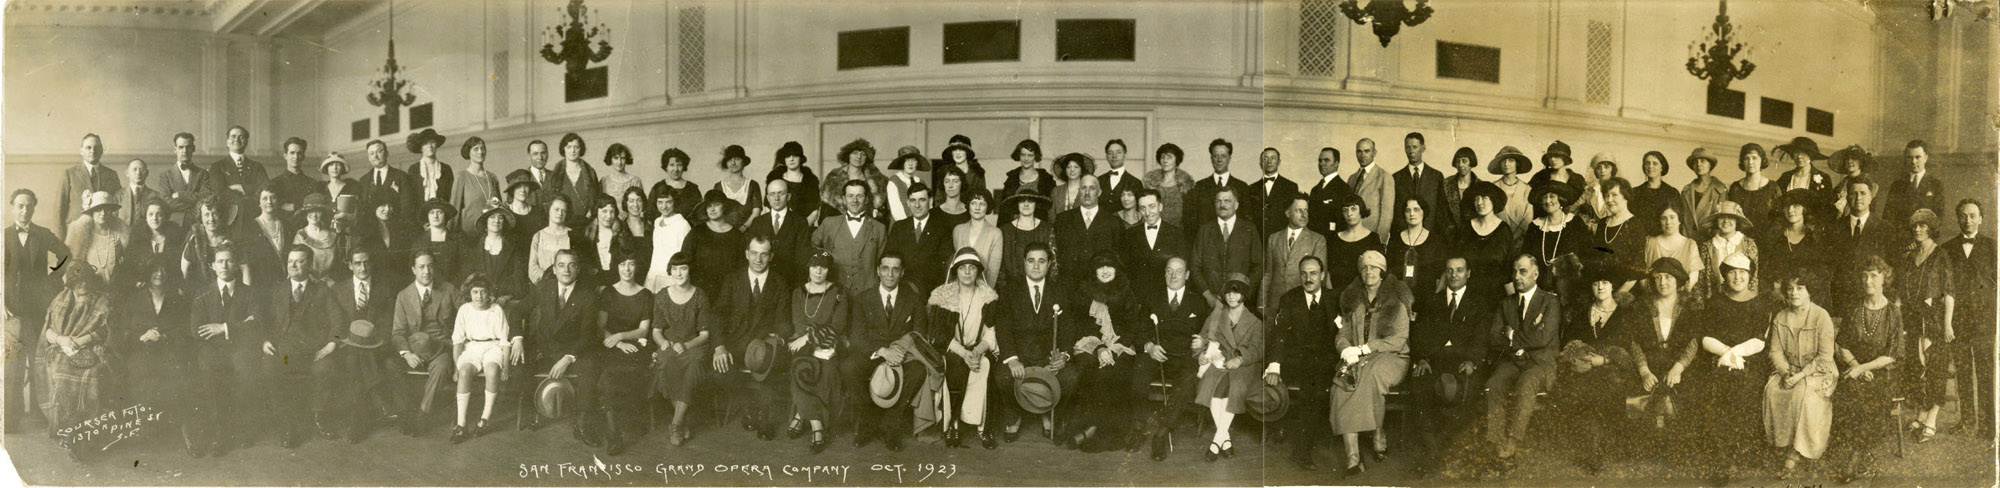 Large sepia-toned group photo of men, women and children on risers inside high-ceilinged space